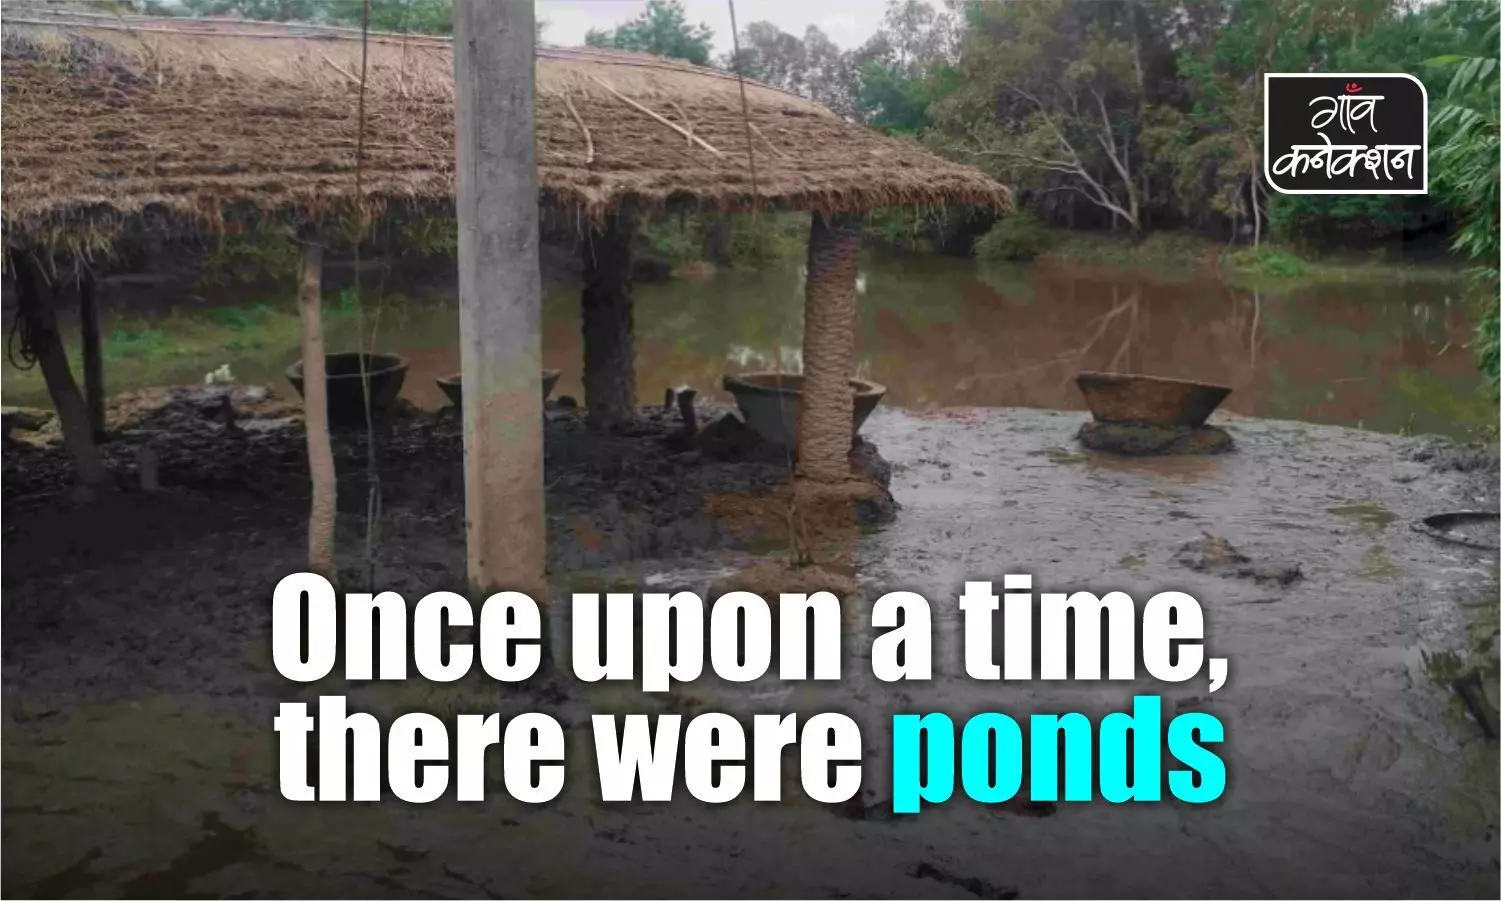 We have lost 22 lakh ponds since independence. Let that sink in